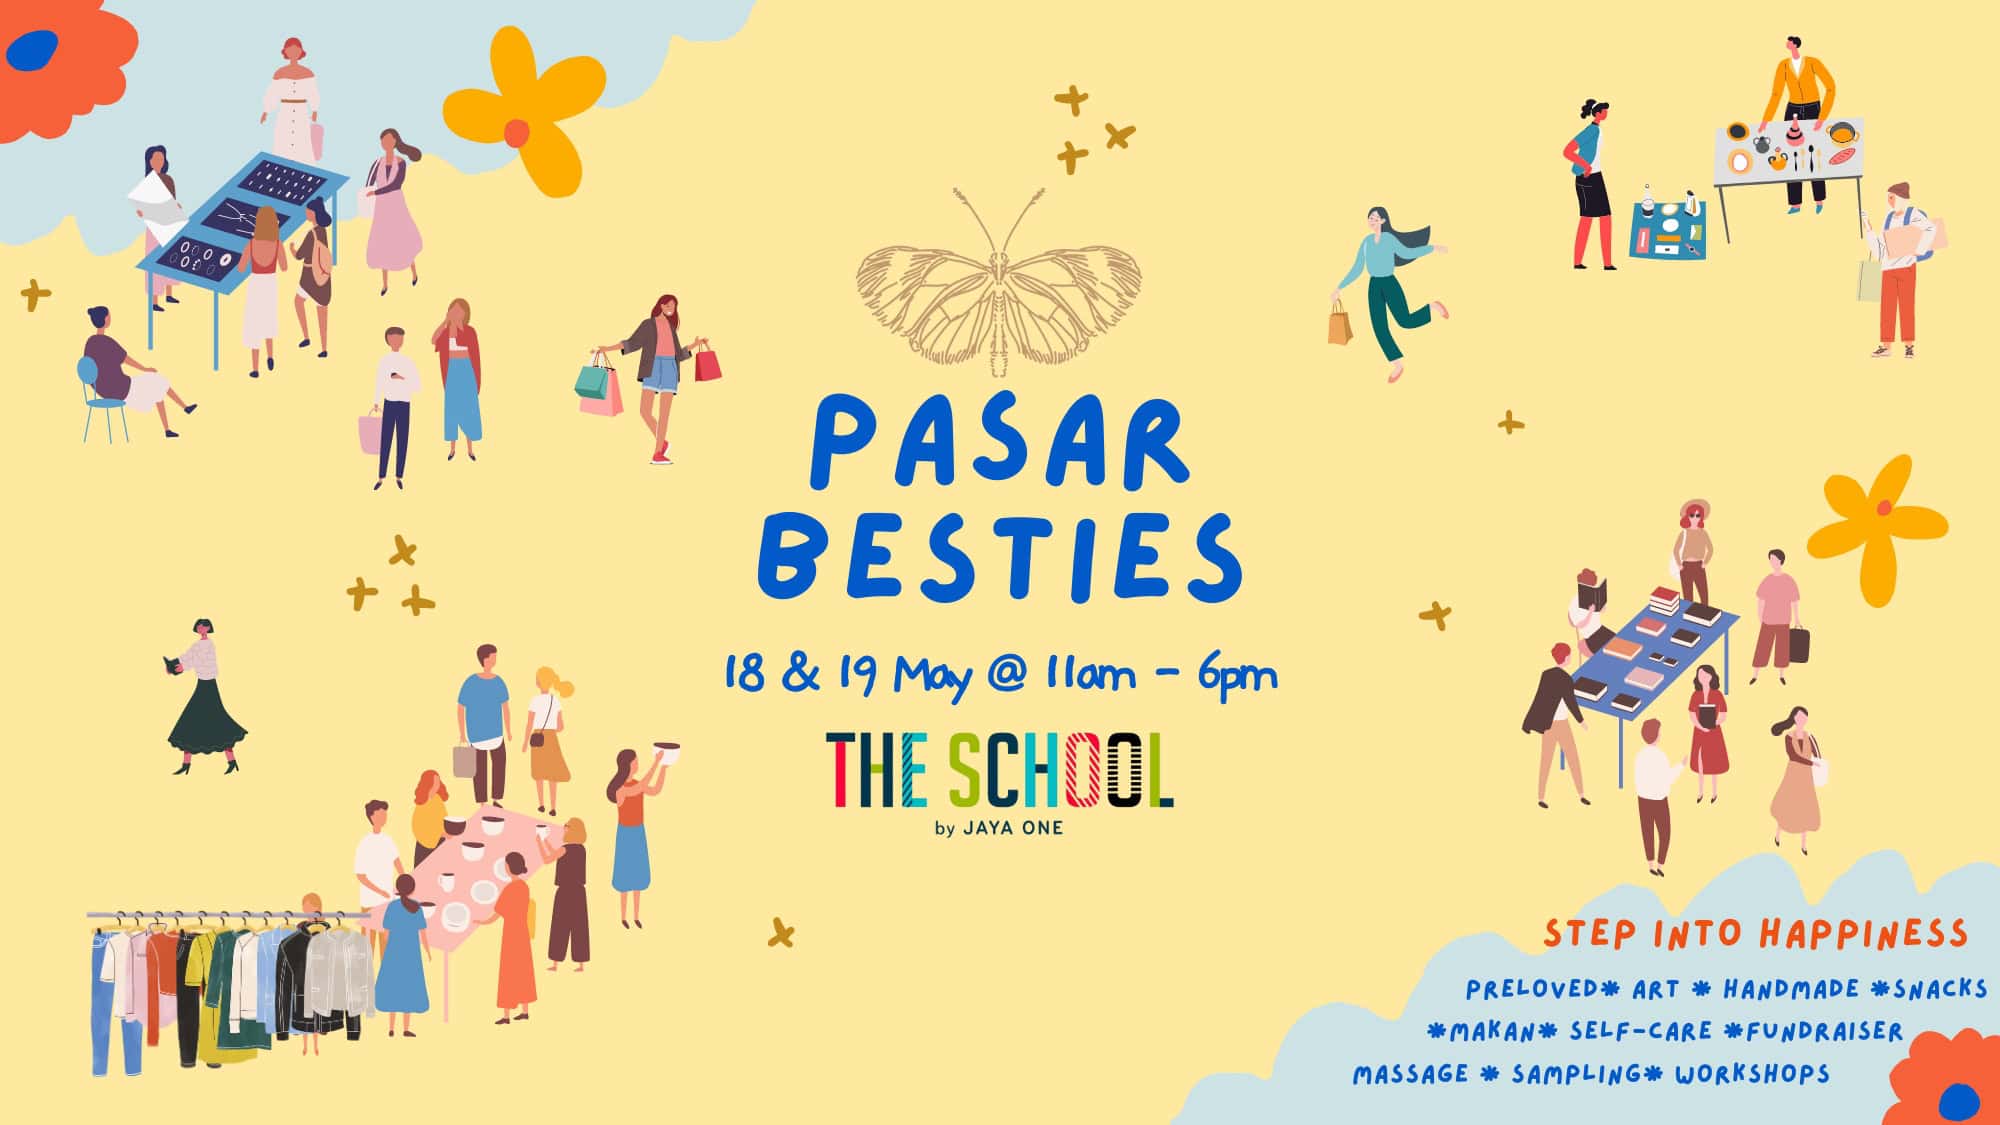 PASAR BESTIES Bazaar: The Butterfly Project’s Initiative Promoting the First Step to Happiness